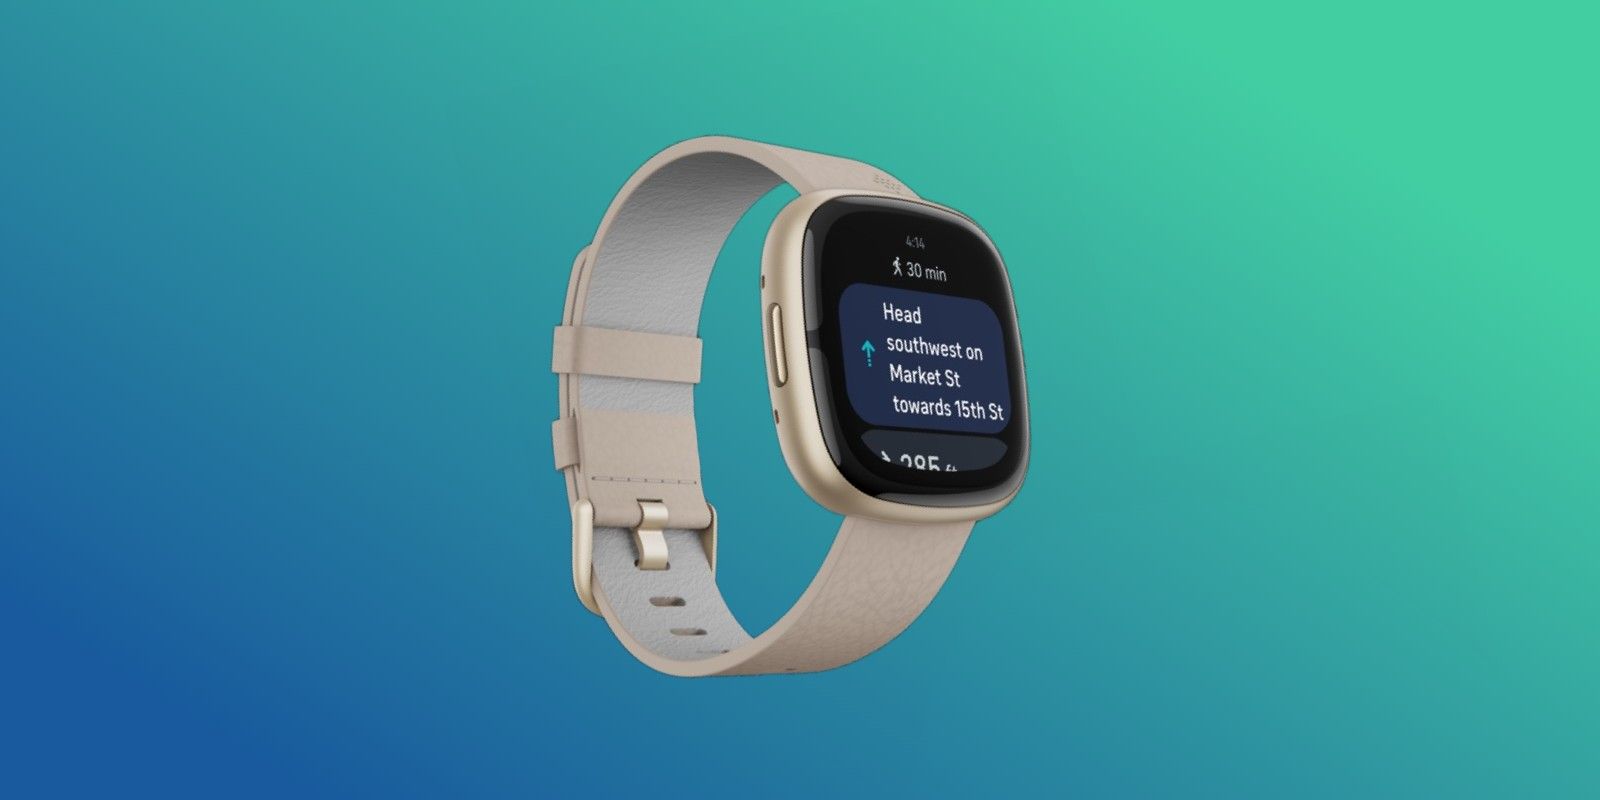 A photo of the Fitbit Sense 2 with Google Maps navigation on the screen